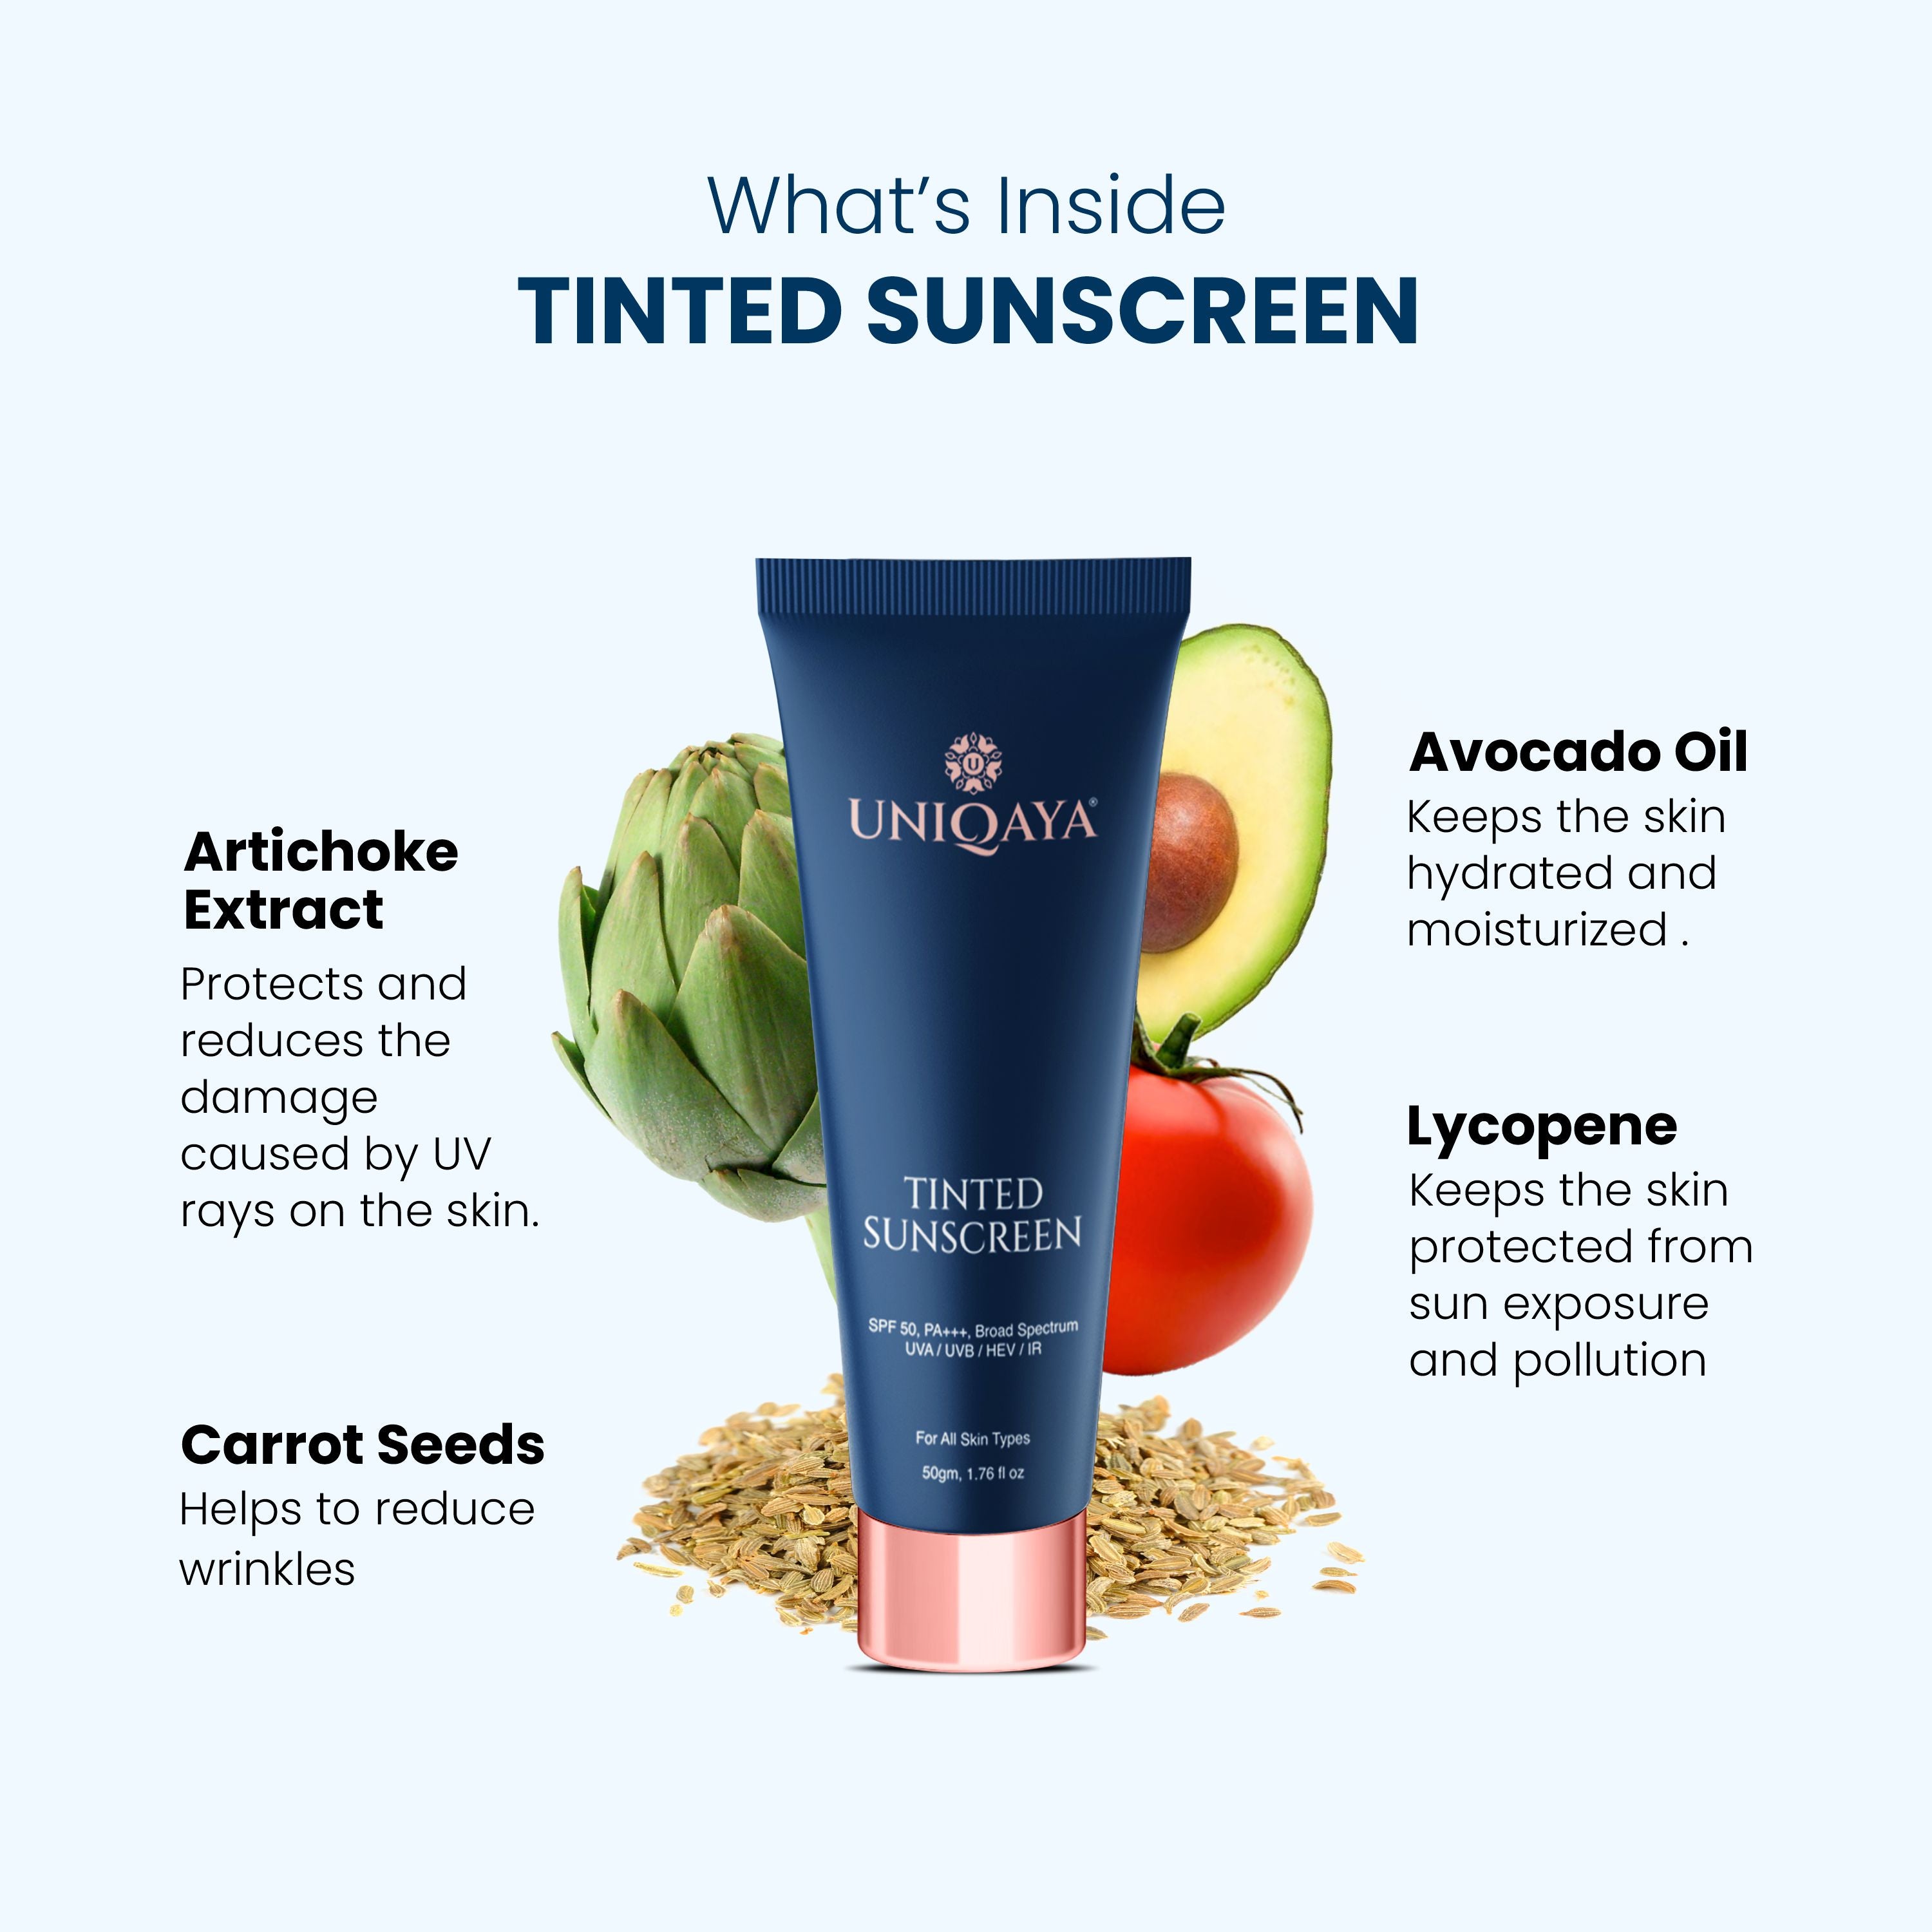 What's Inside Tinted Sunscreen?